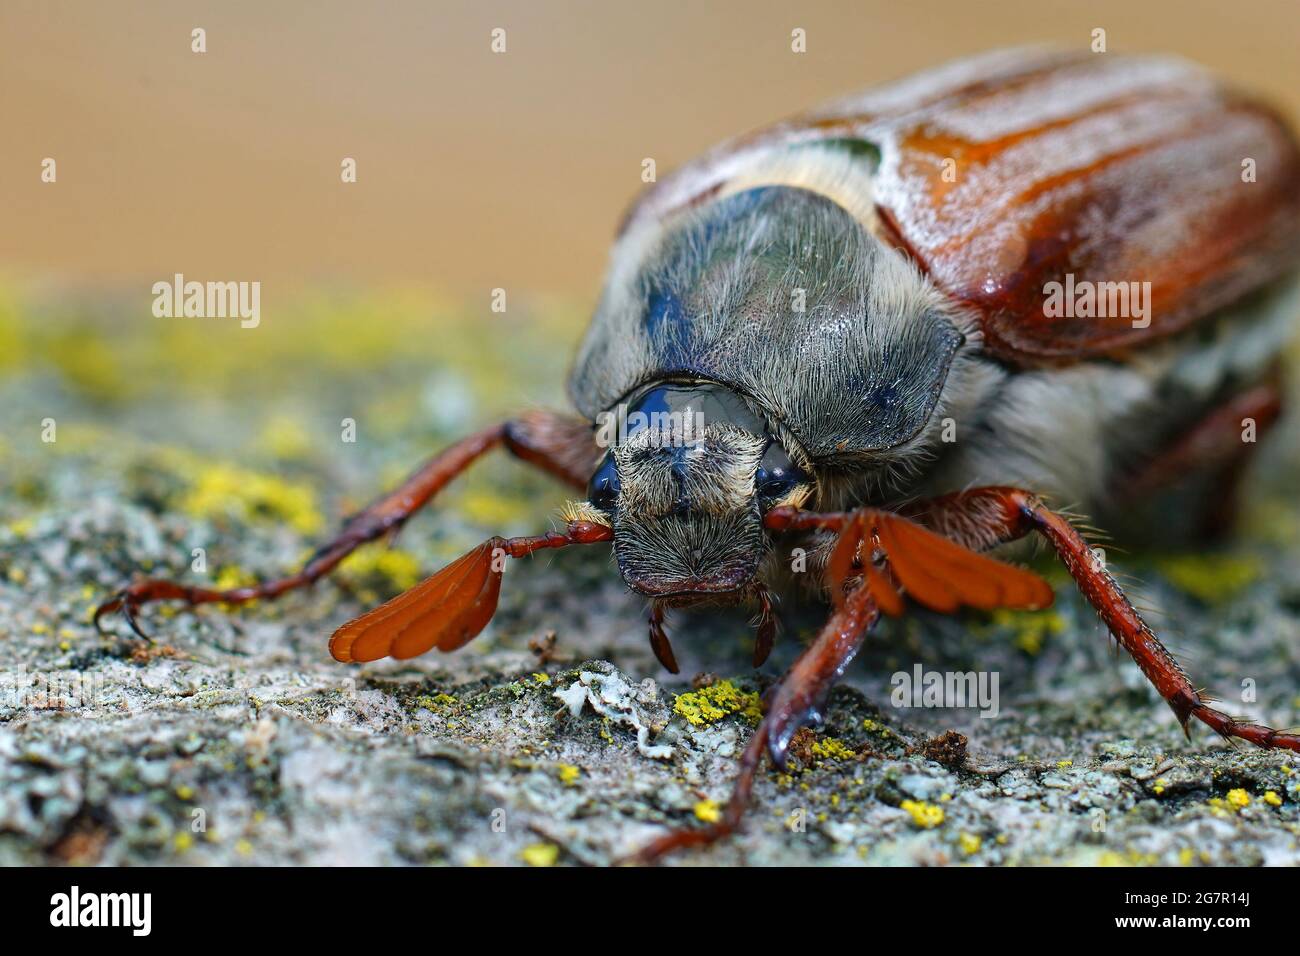 Closeup on the head and antenna of the cockchafer, Melolontha melolontha Stock Photo